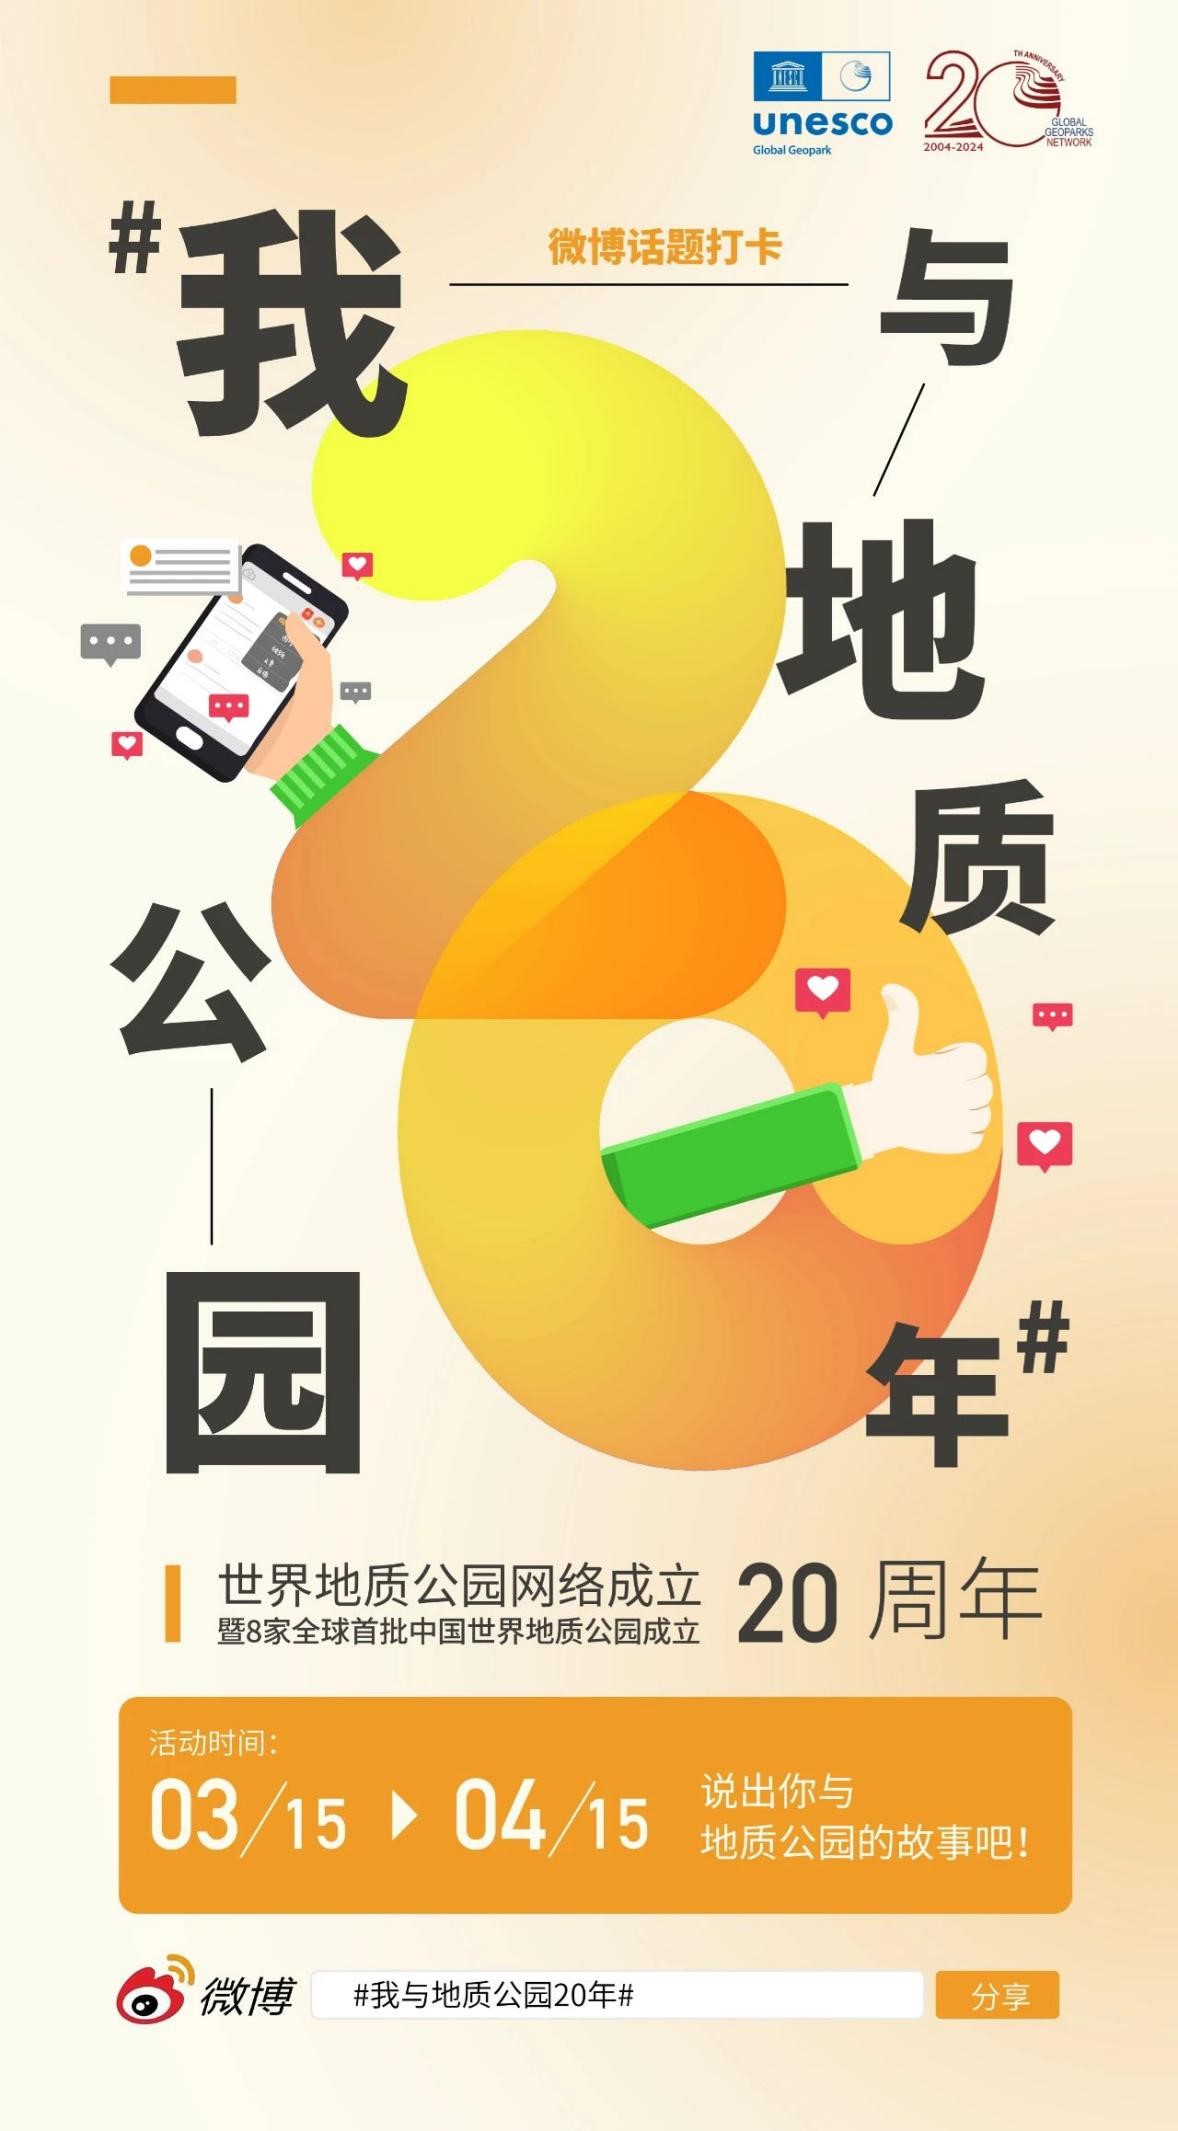 Check-in Success | 20 Years with Geoparks Weibo Topic Check-in Event is Here!